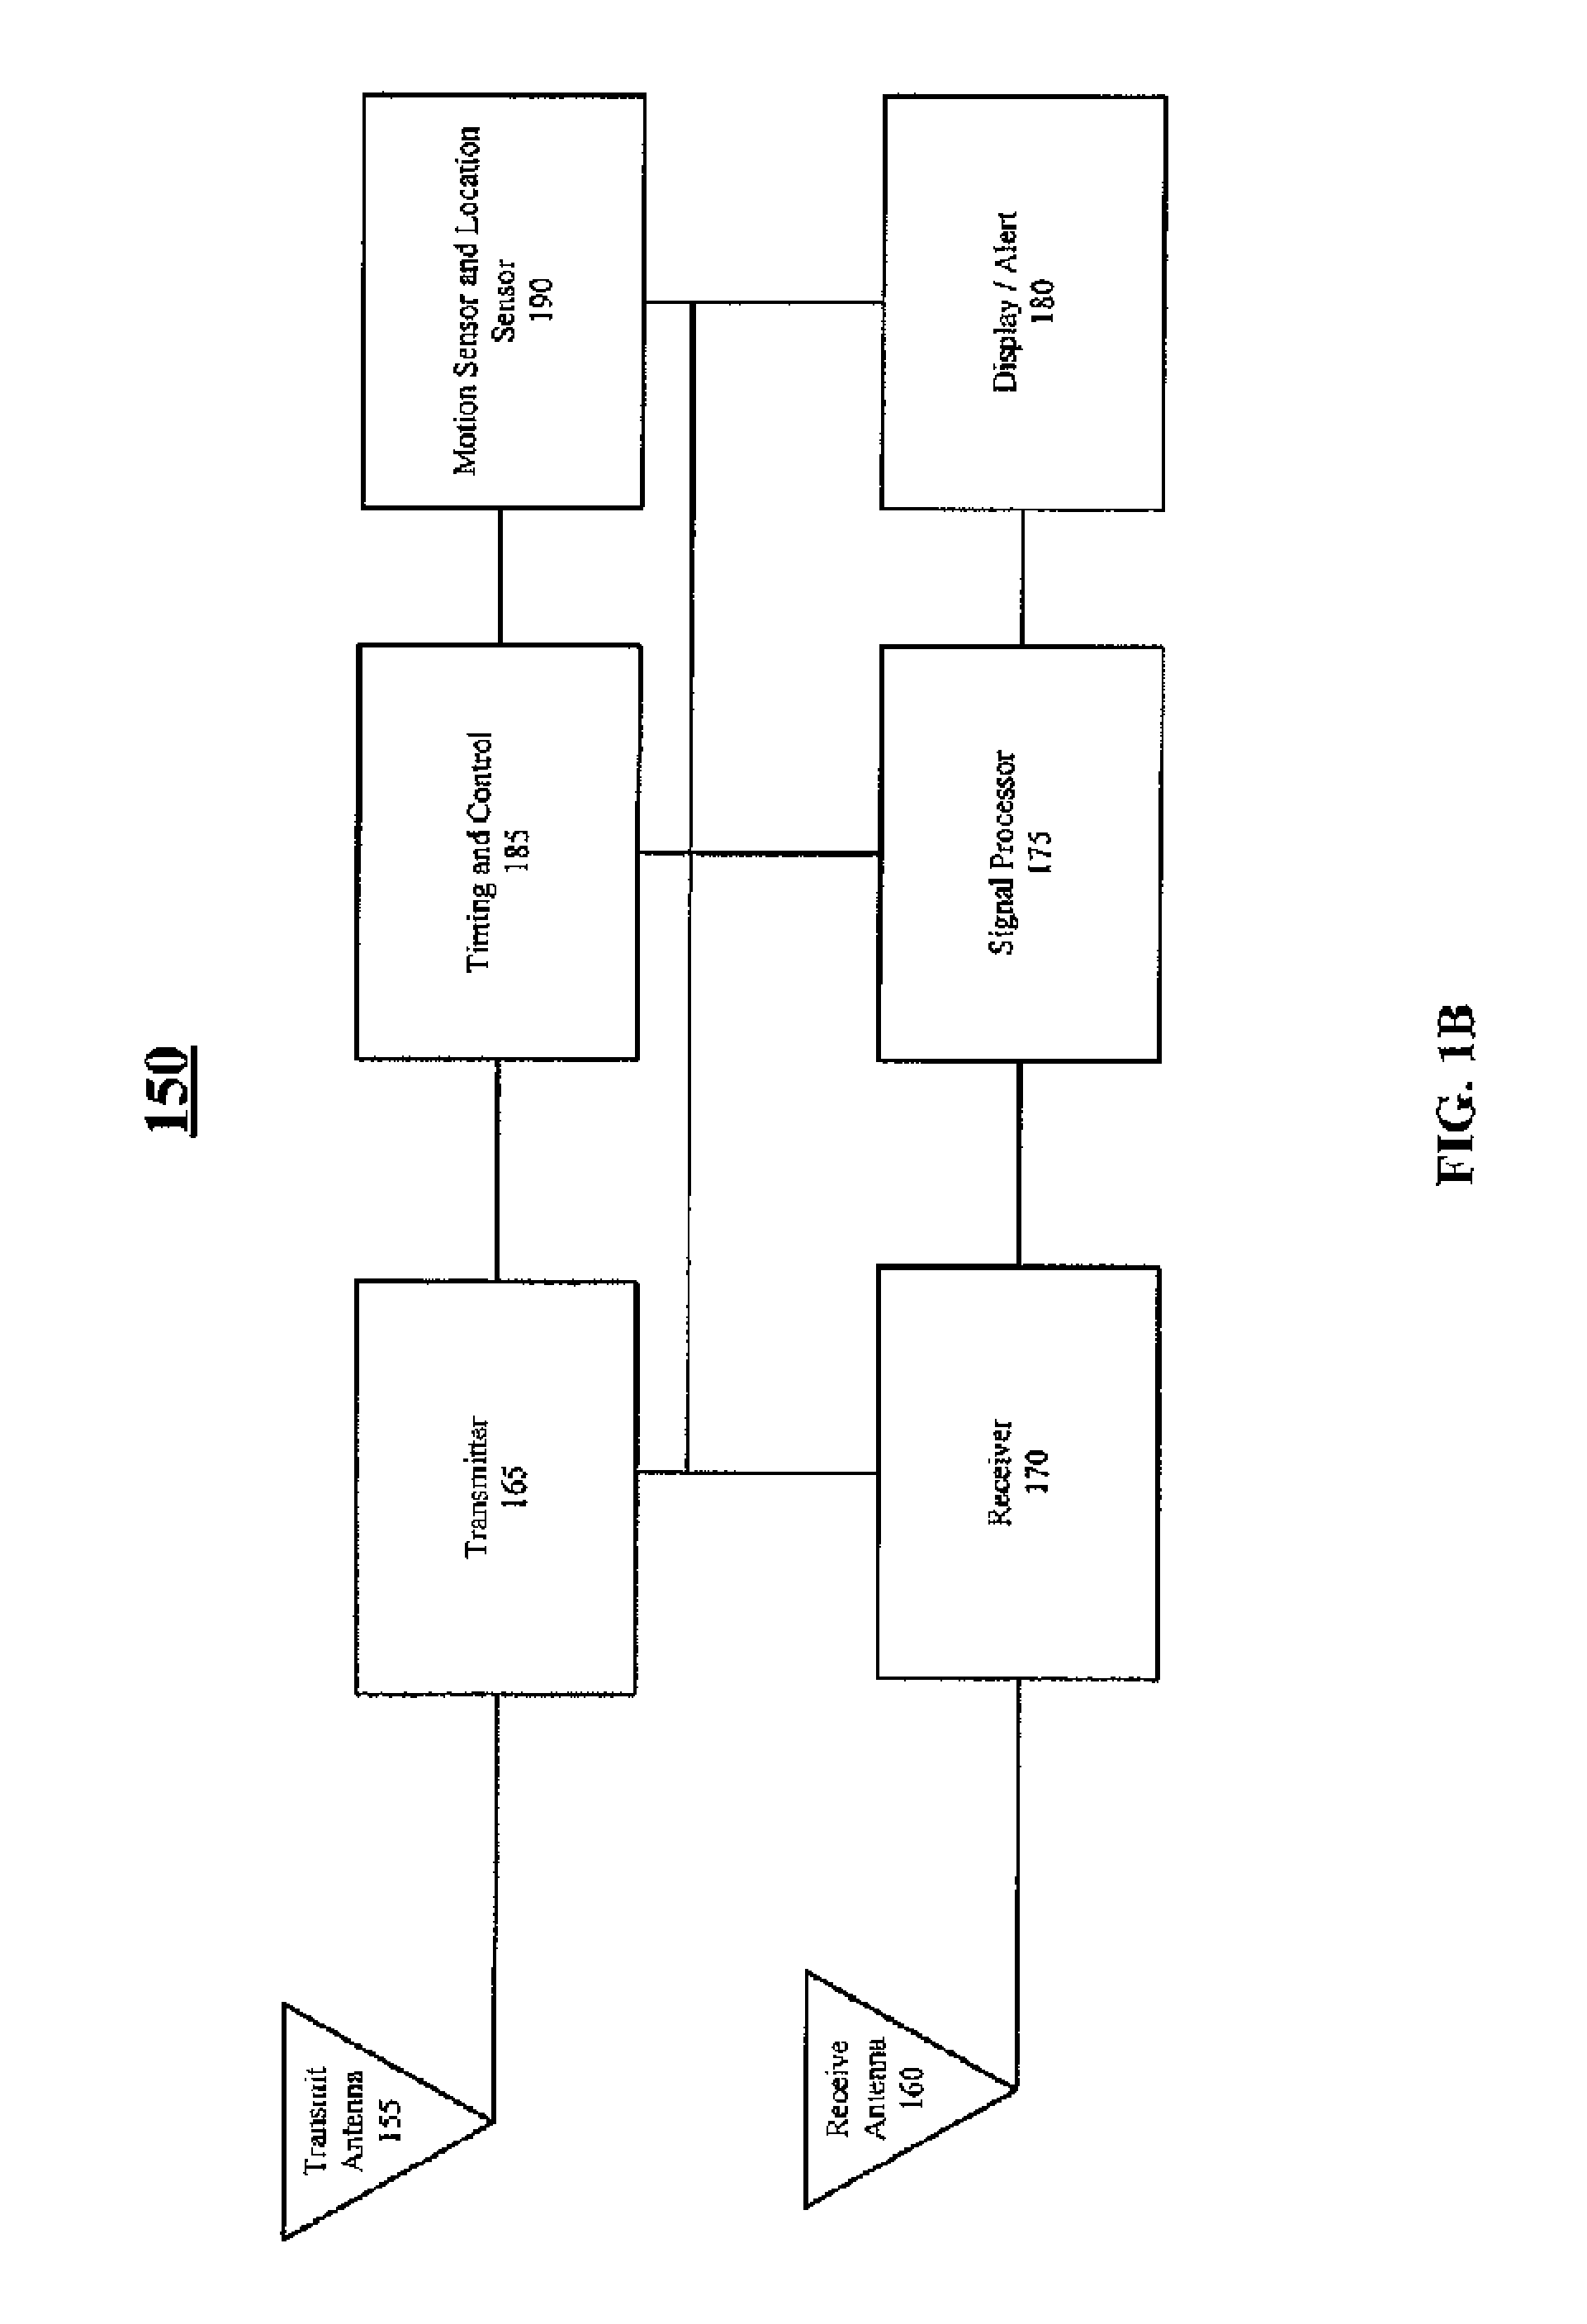 Patient monitoring and surveillance system, methods, and devices